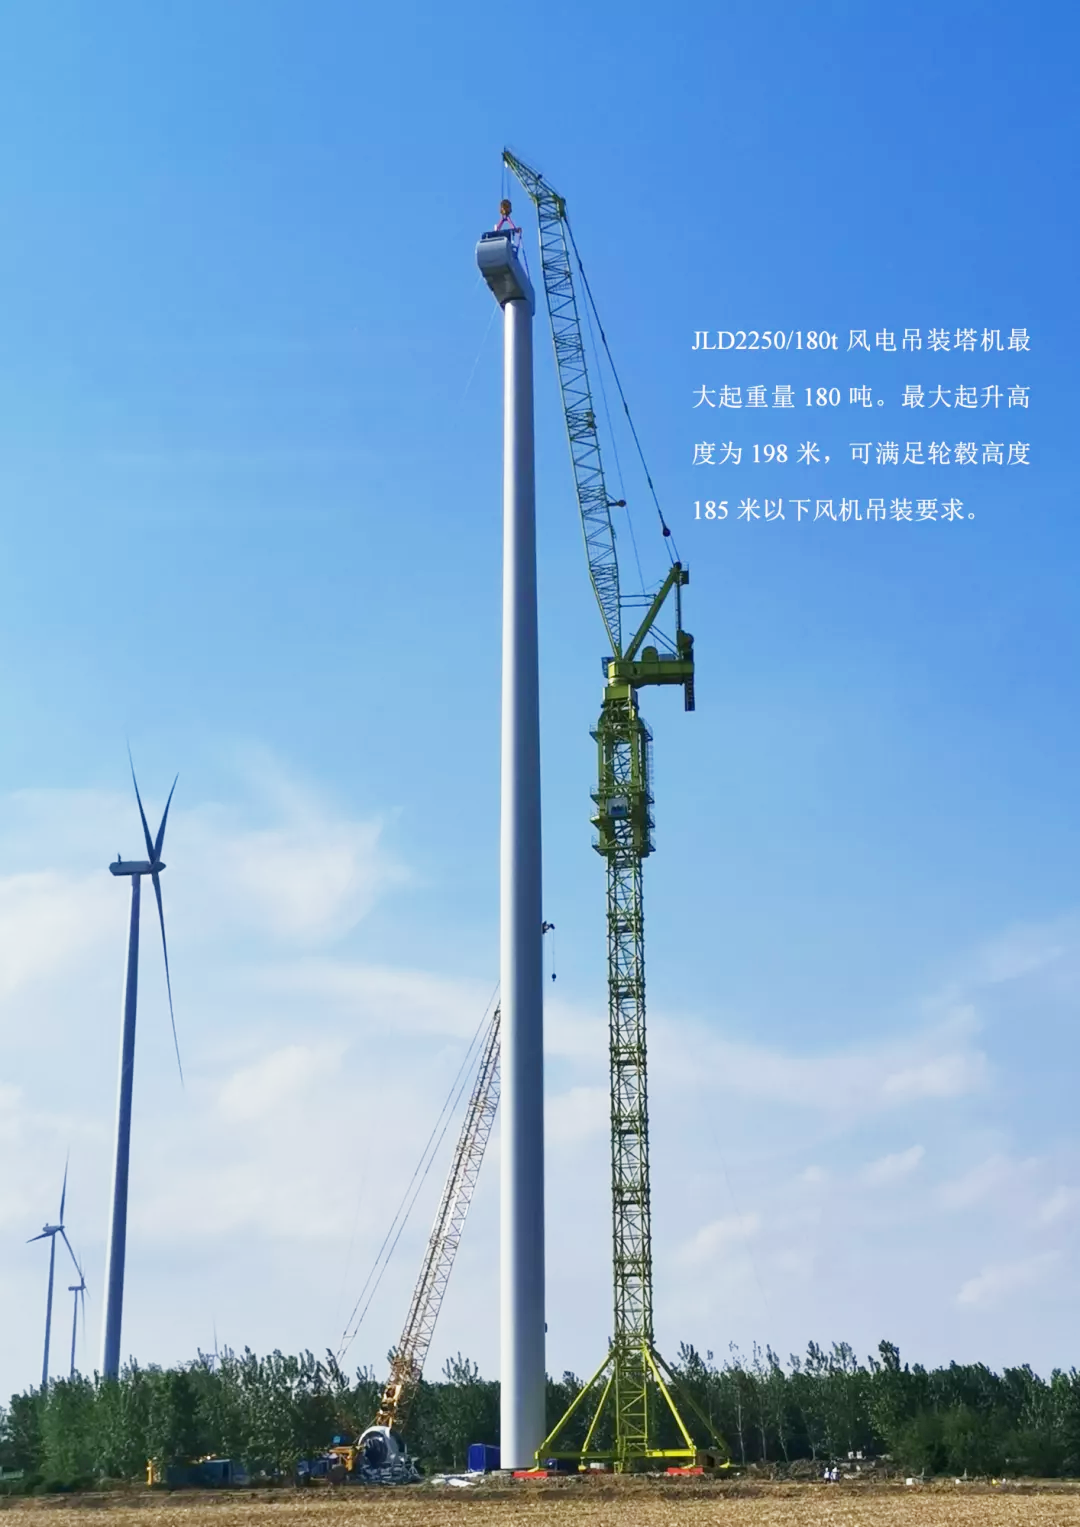 Weite helps "China wind power" in the "14th five year plan"